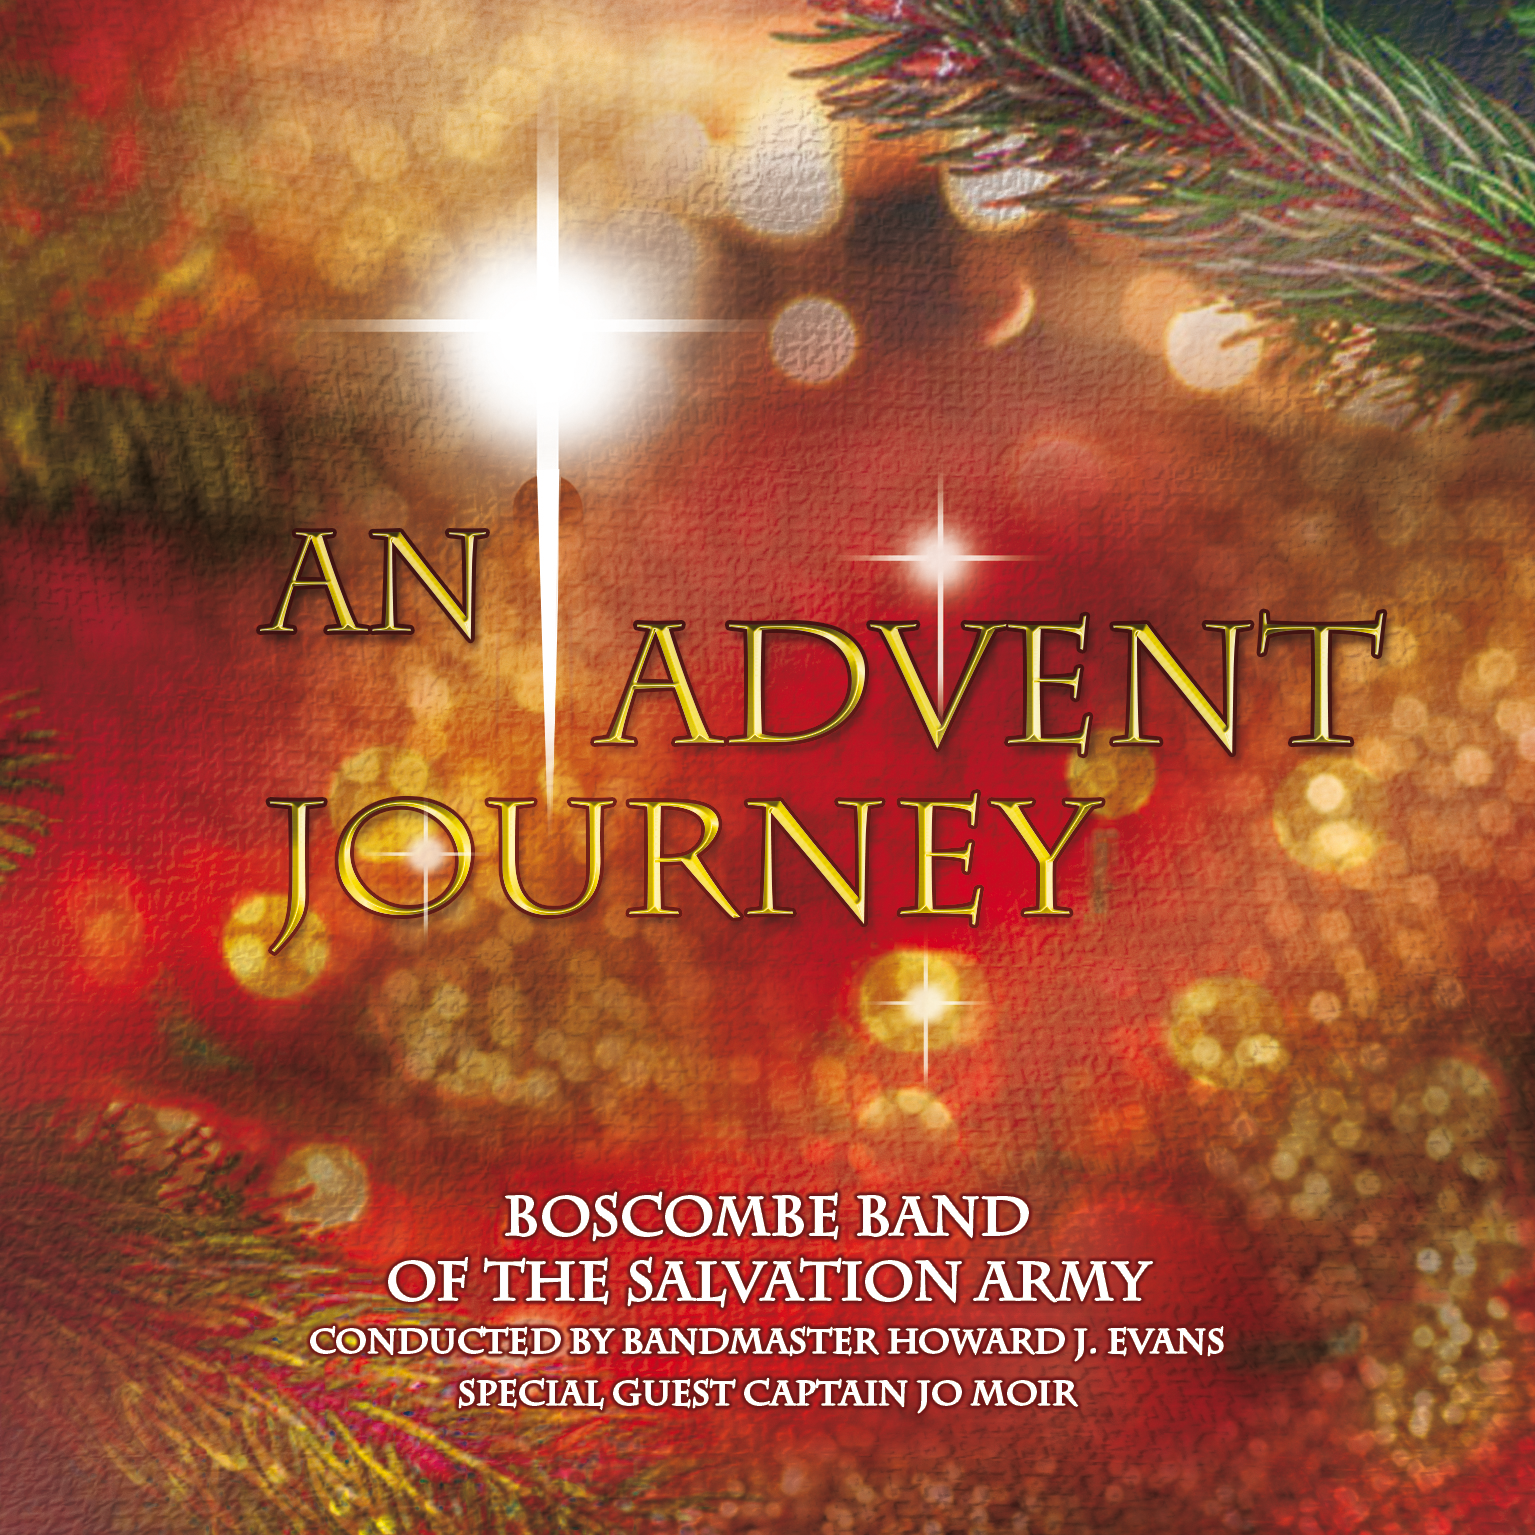 An Advent Journey - Download